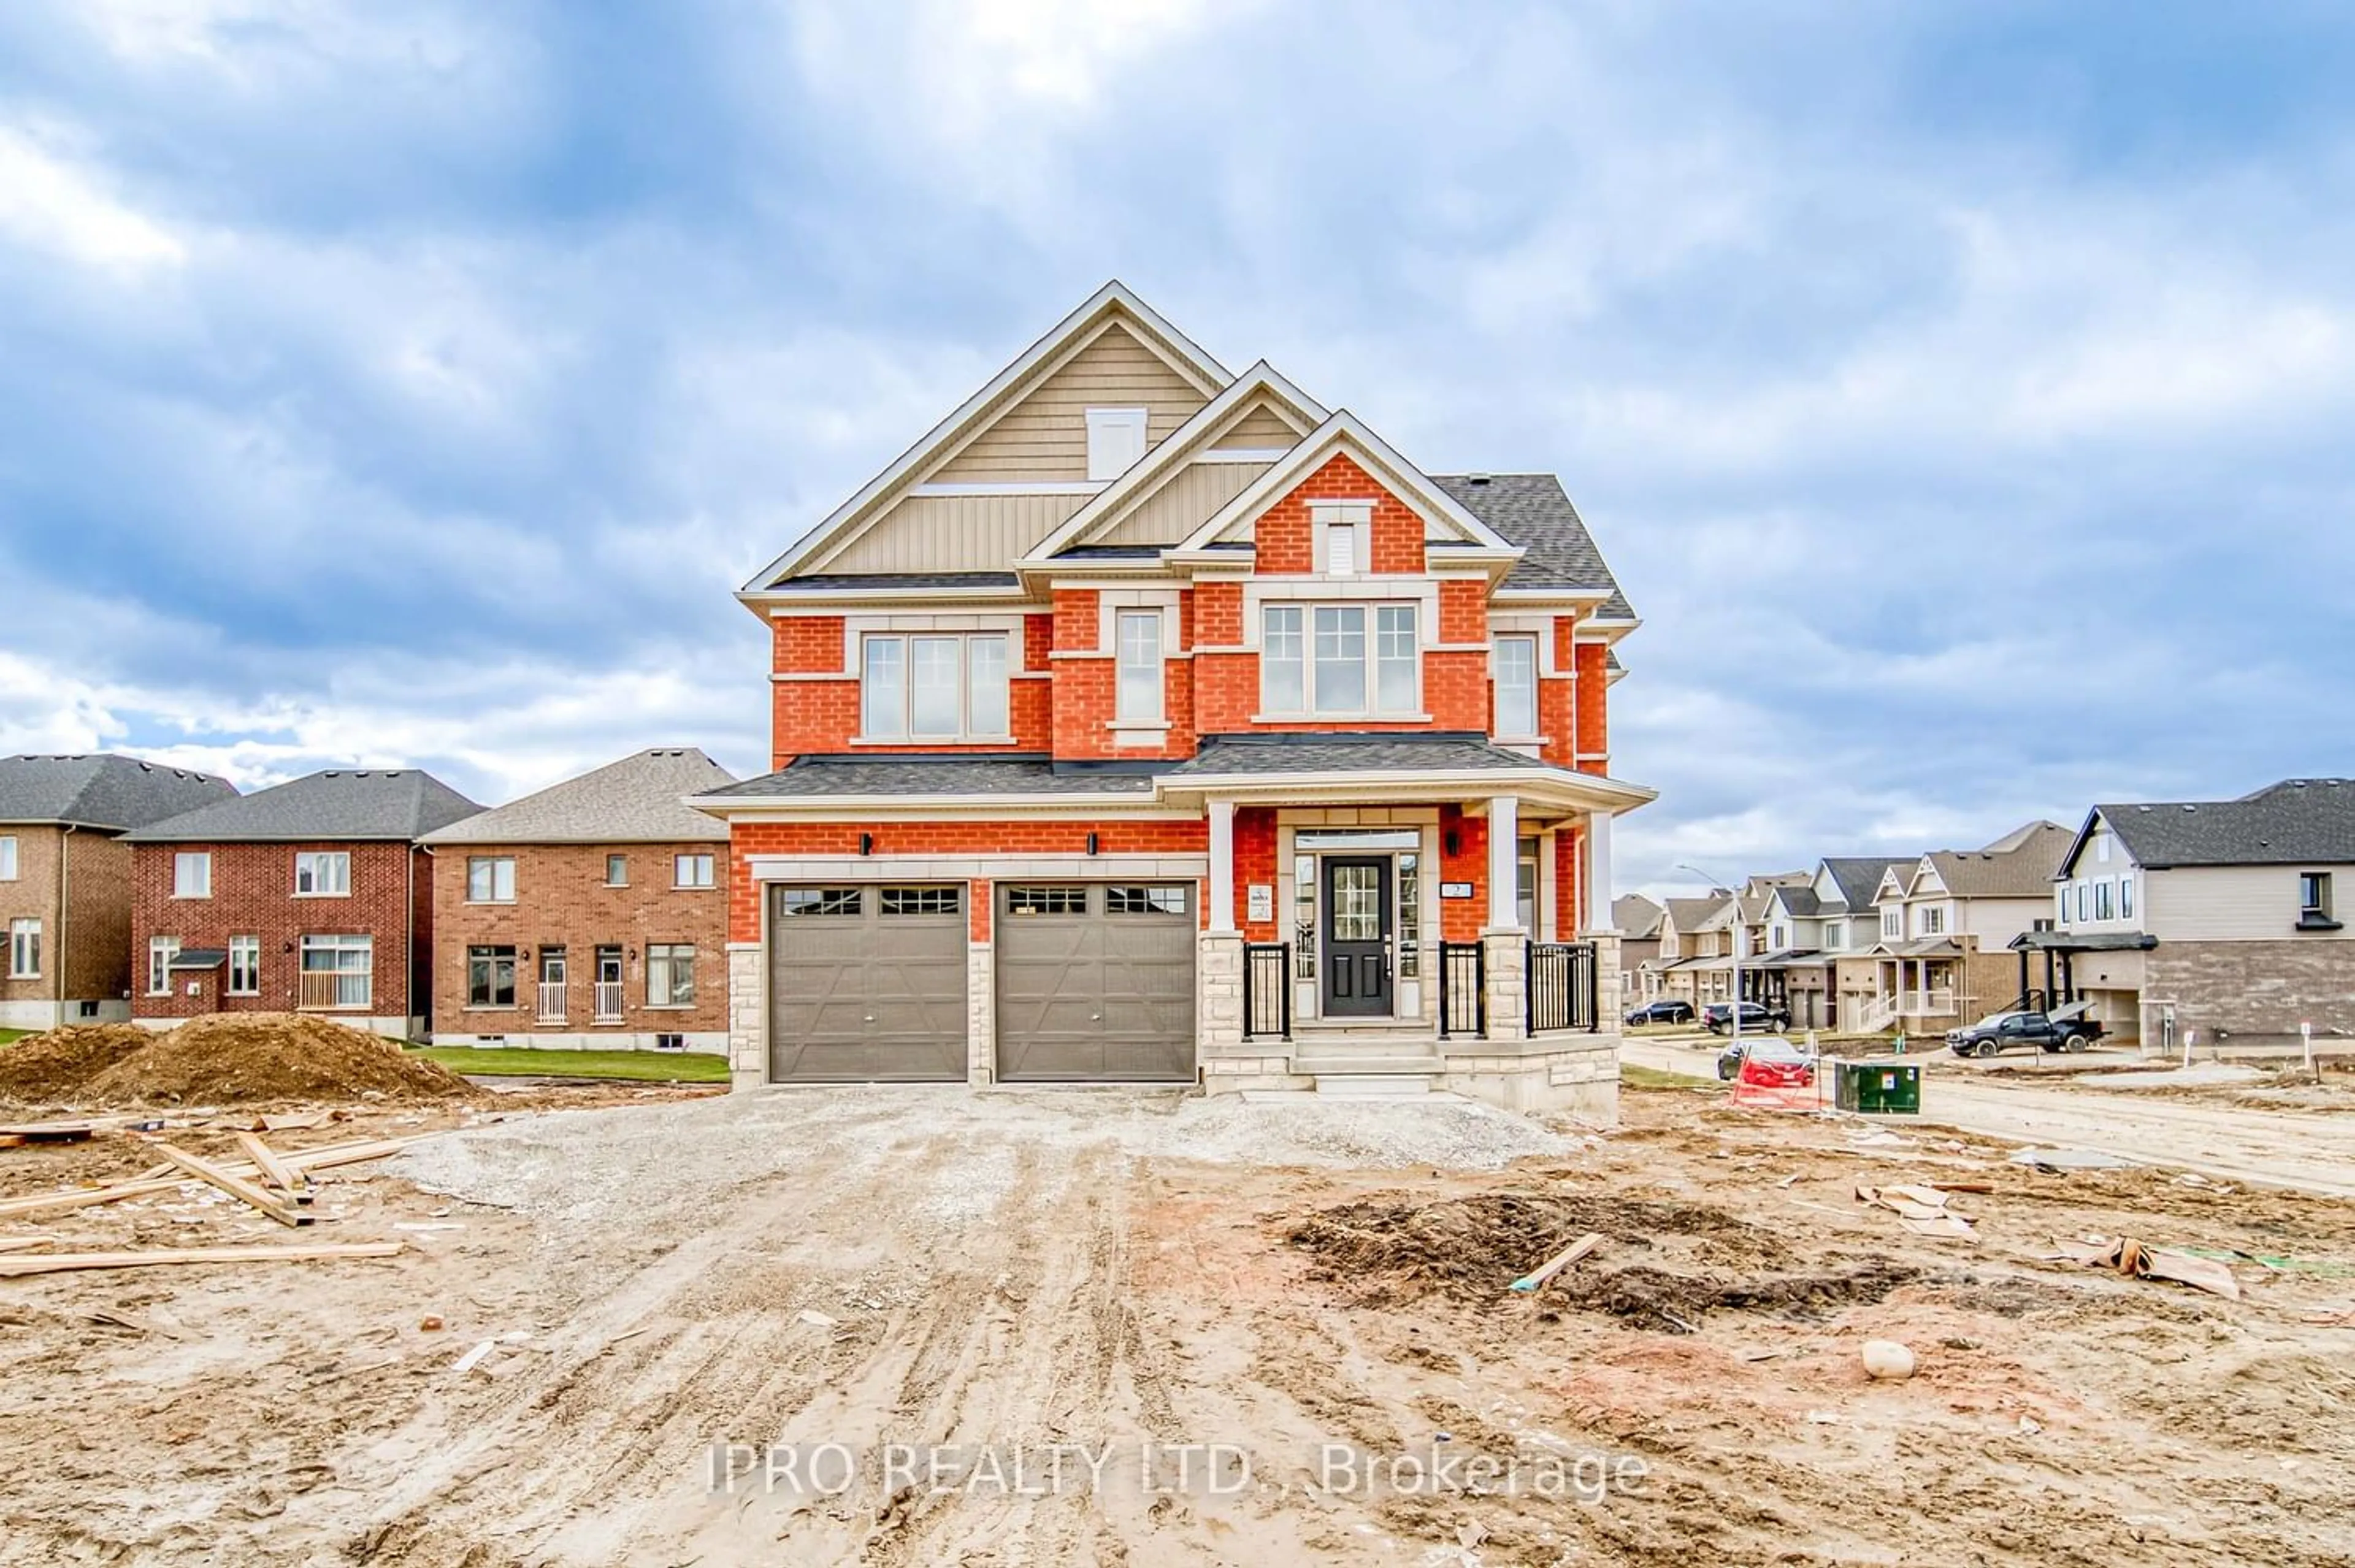 Home with brick exterior material for 2 Sagewood Ave, Barrie Ontario L9J 0L1